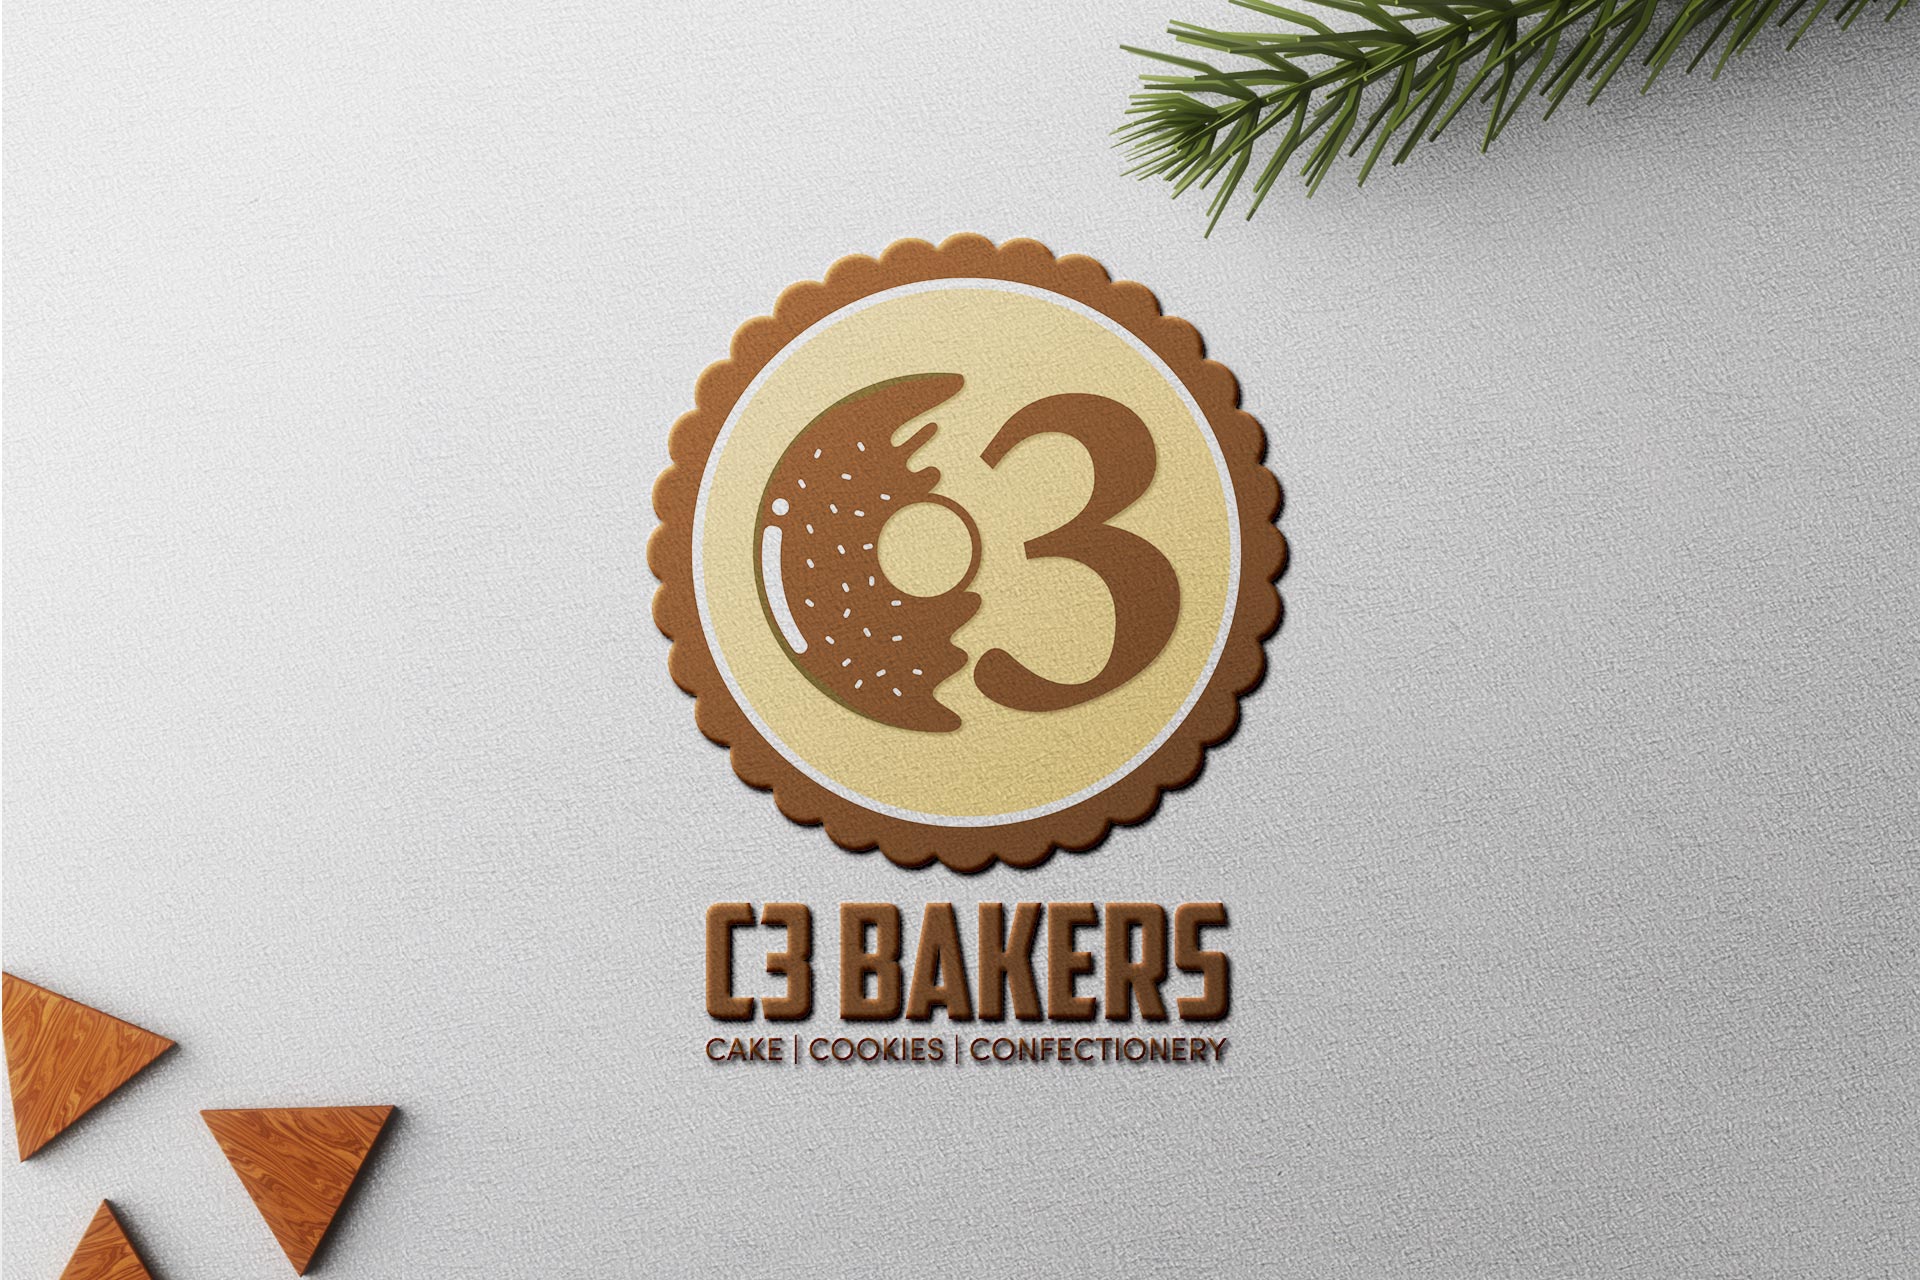 A Creative Bakery Logo designed in a way so that our client easily use it for branding on their bakery products.